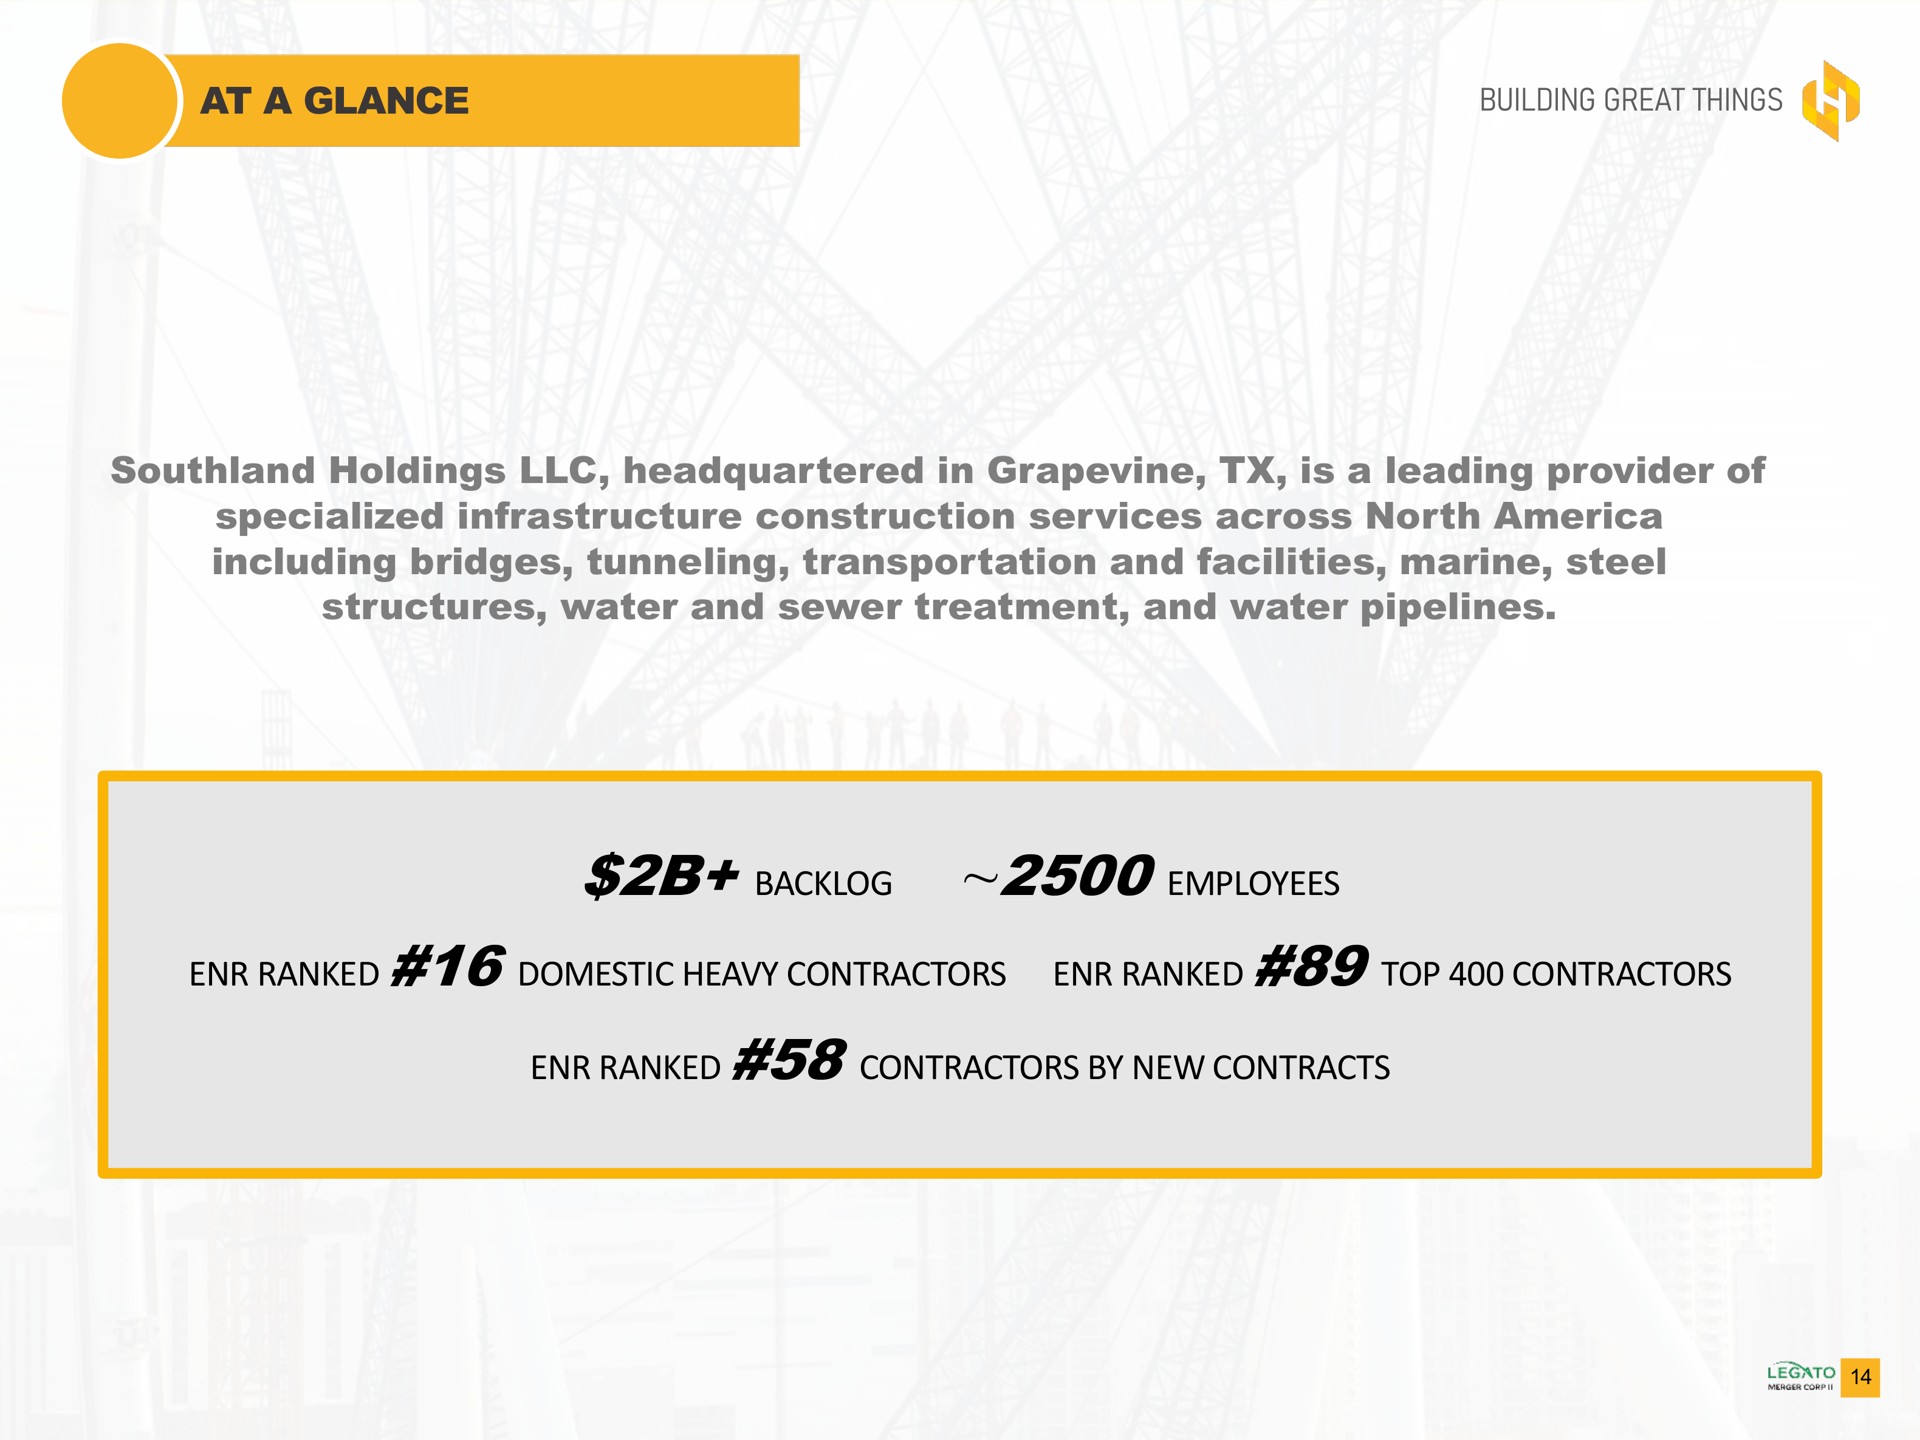 at a glance building great things southland holdings headquartered in grapevine is a leading provider of specialized infrastructure construction services across north including bridges tunneling transportation and facilities marine steel structures water and sewer treatment and water pipelines backlog employees ranked domestic heavy contractors ranked top contractors ranked contractors by new contracts | Southland Holdings